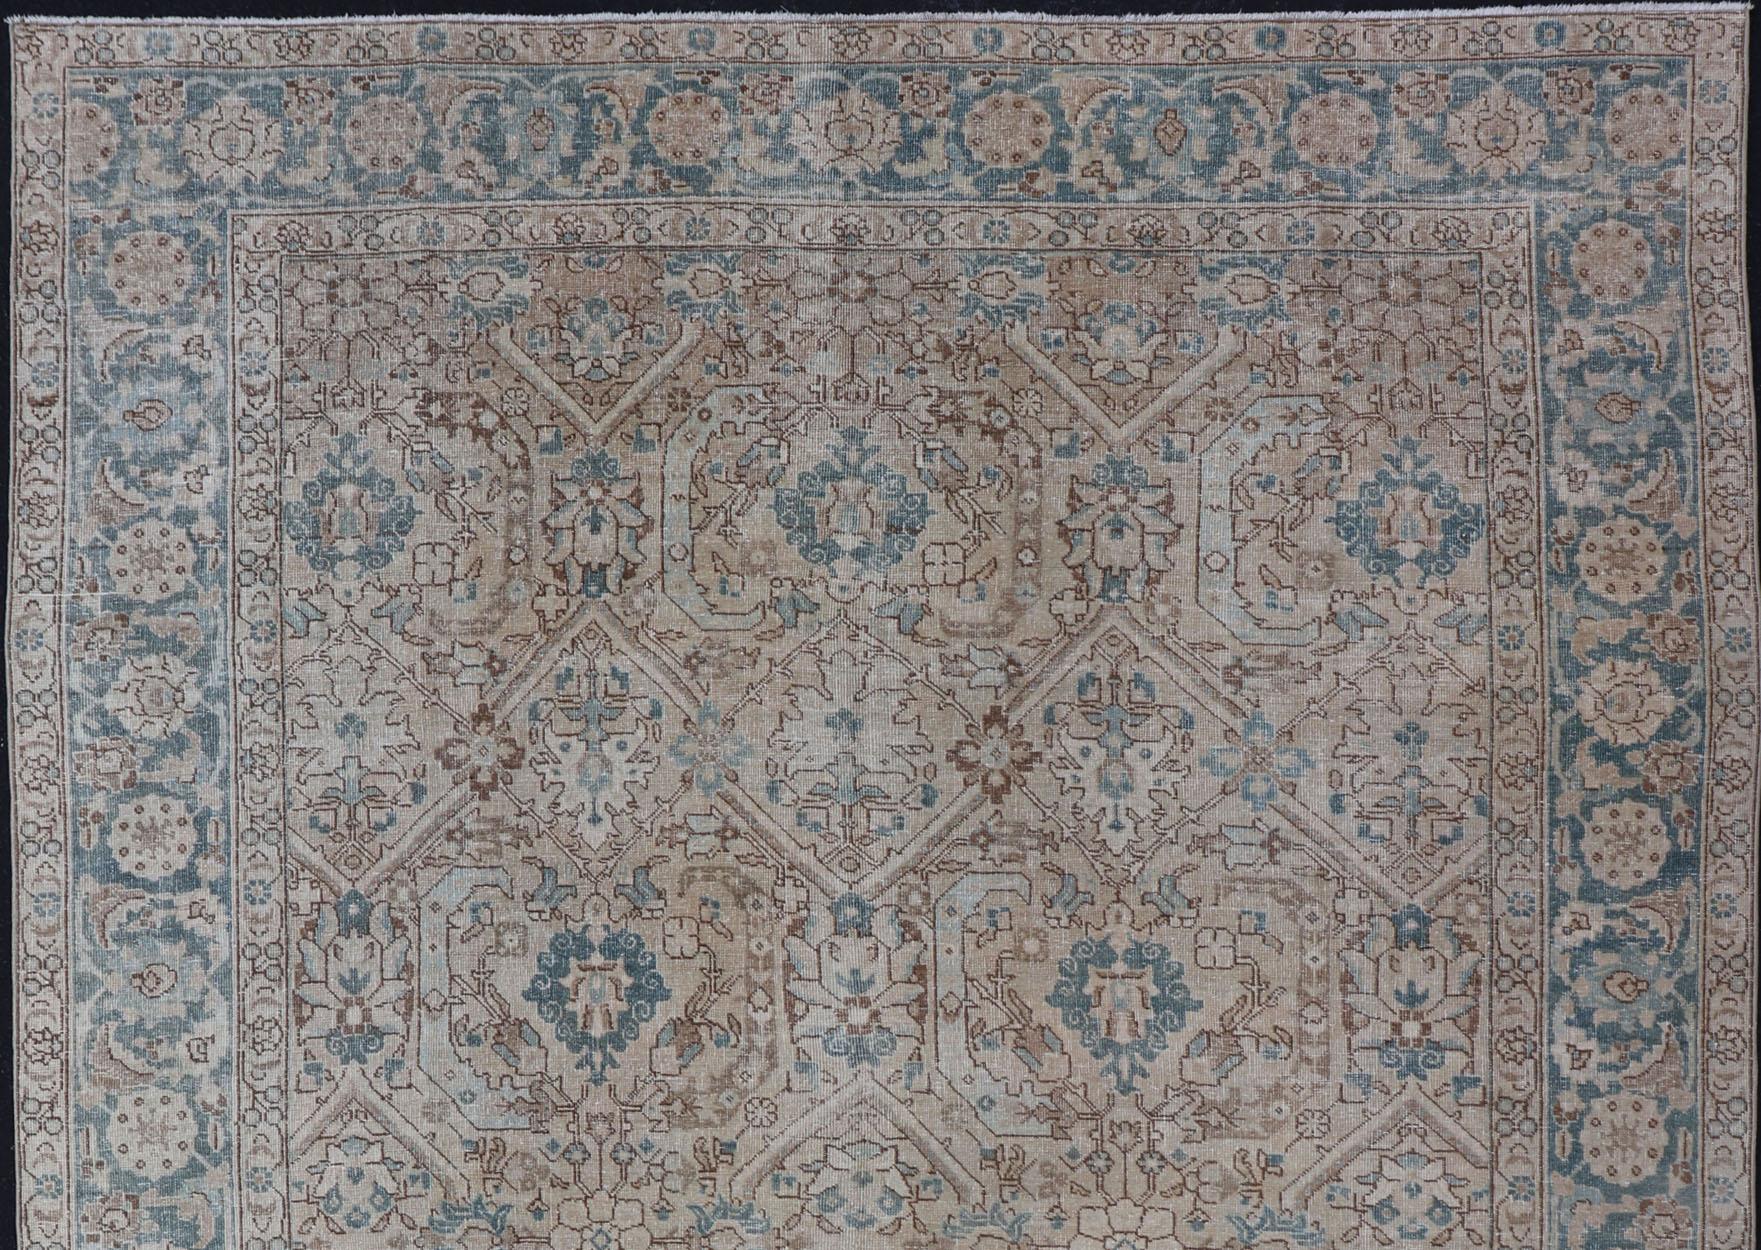 Tan background Persian Tabriz rug with geometric design, rug ZIR-65-KV-11, country of origin / type: Iran / Tabriz, circa 1930.

This magnificent early 20th century Persian Tabriz rug bears a beautiful, all-over sub-geometric floral design paired